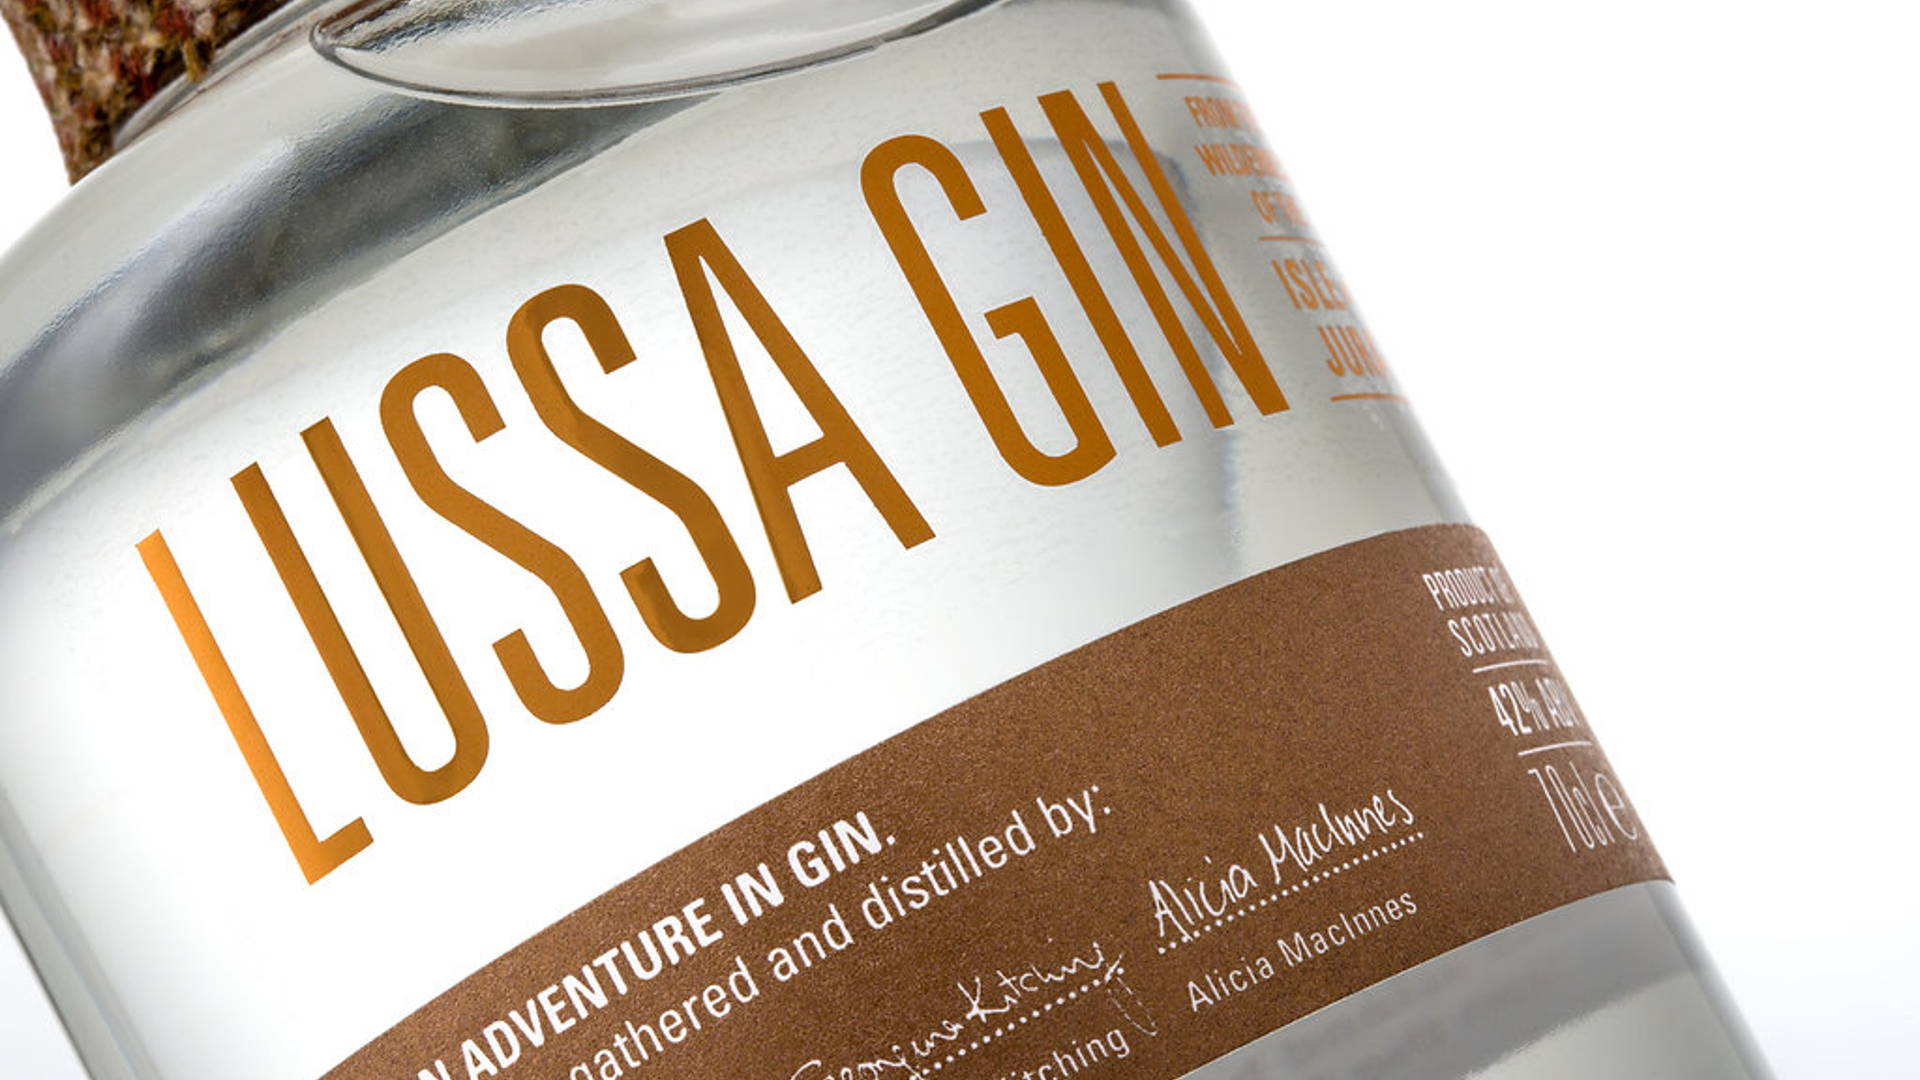 Featured image for The Crisp Design of Lussa Gin